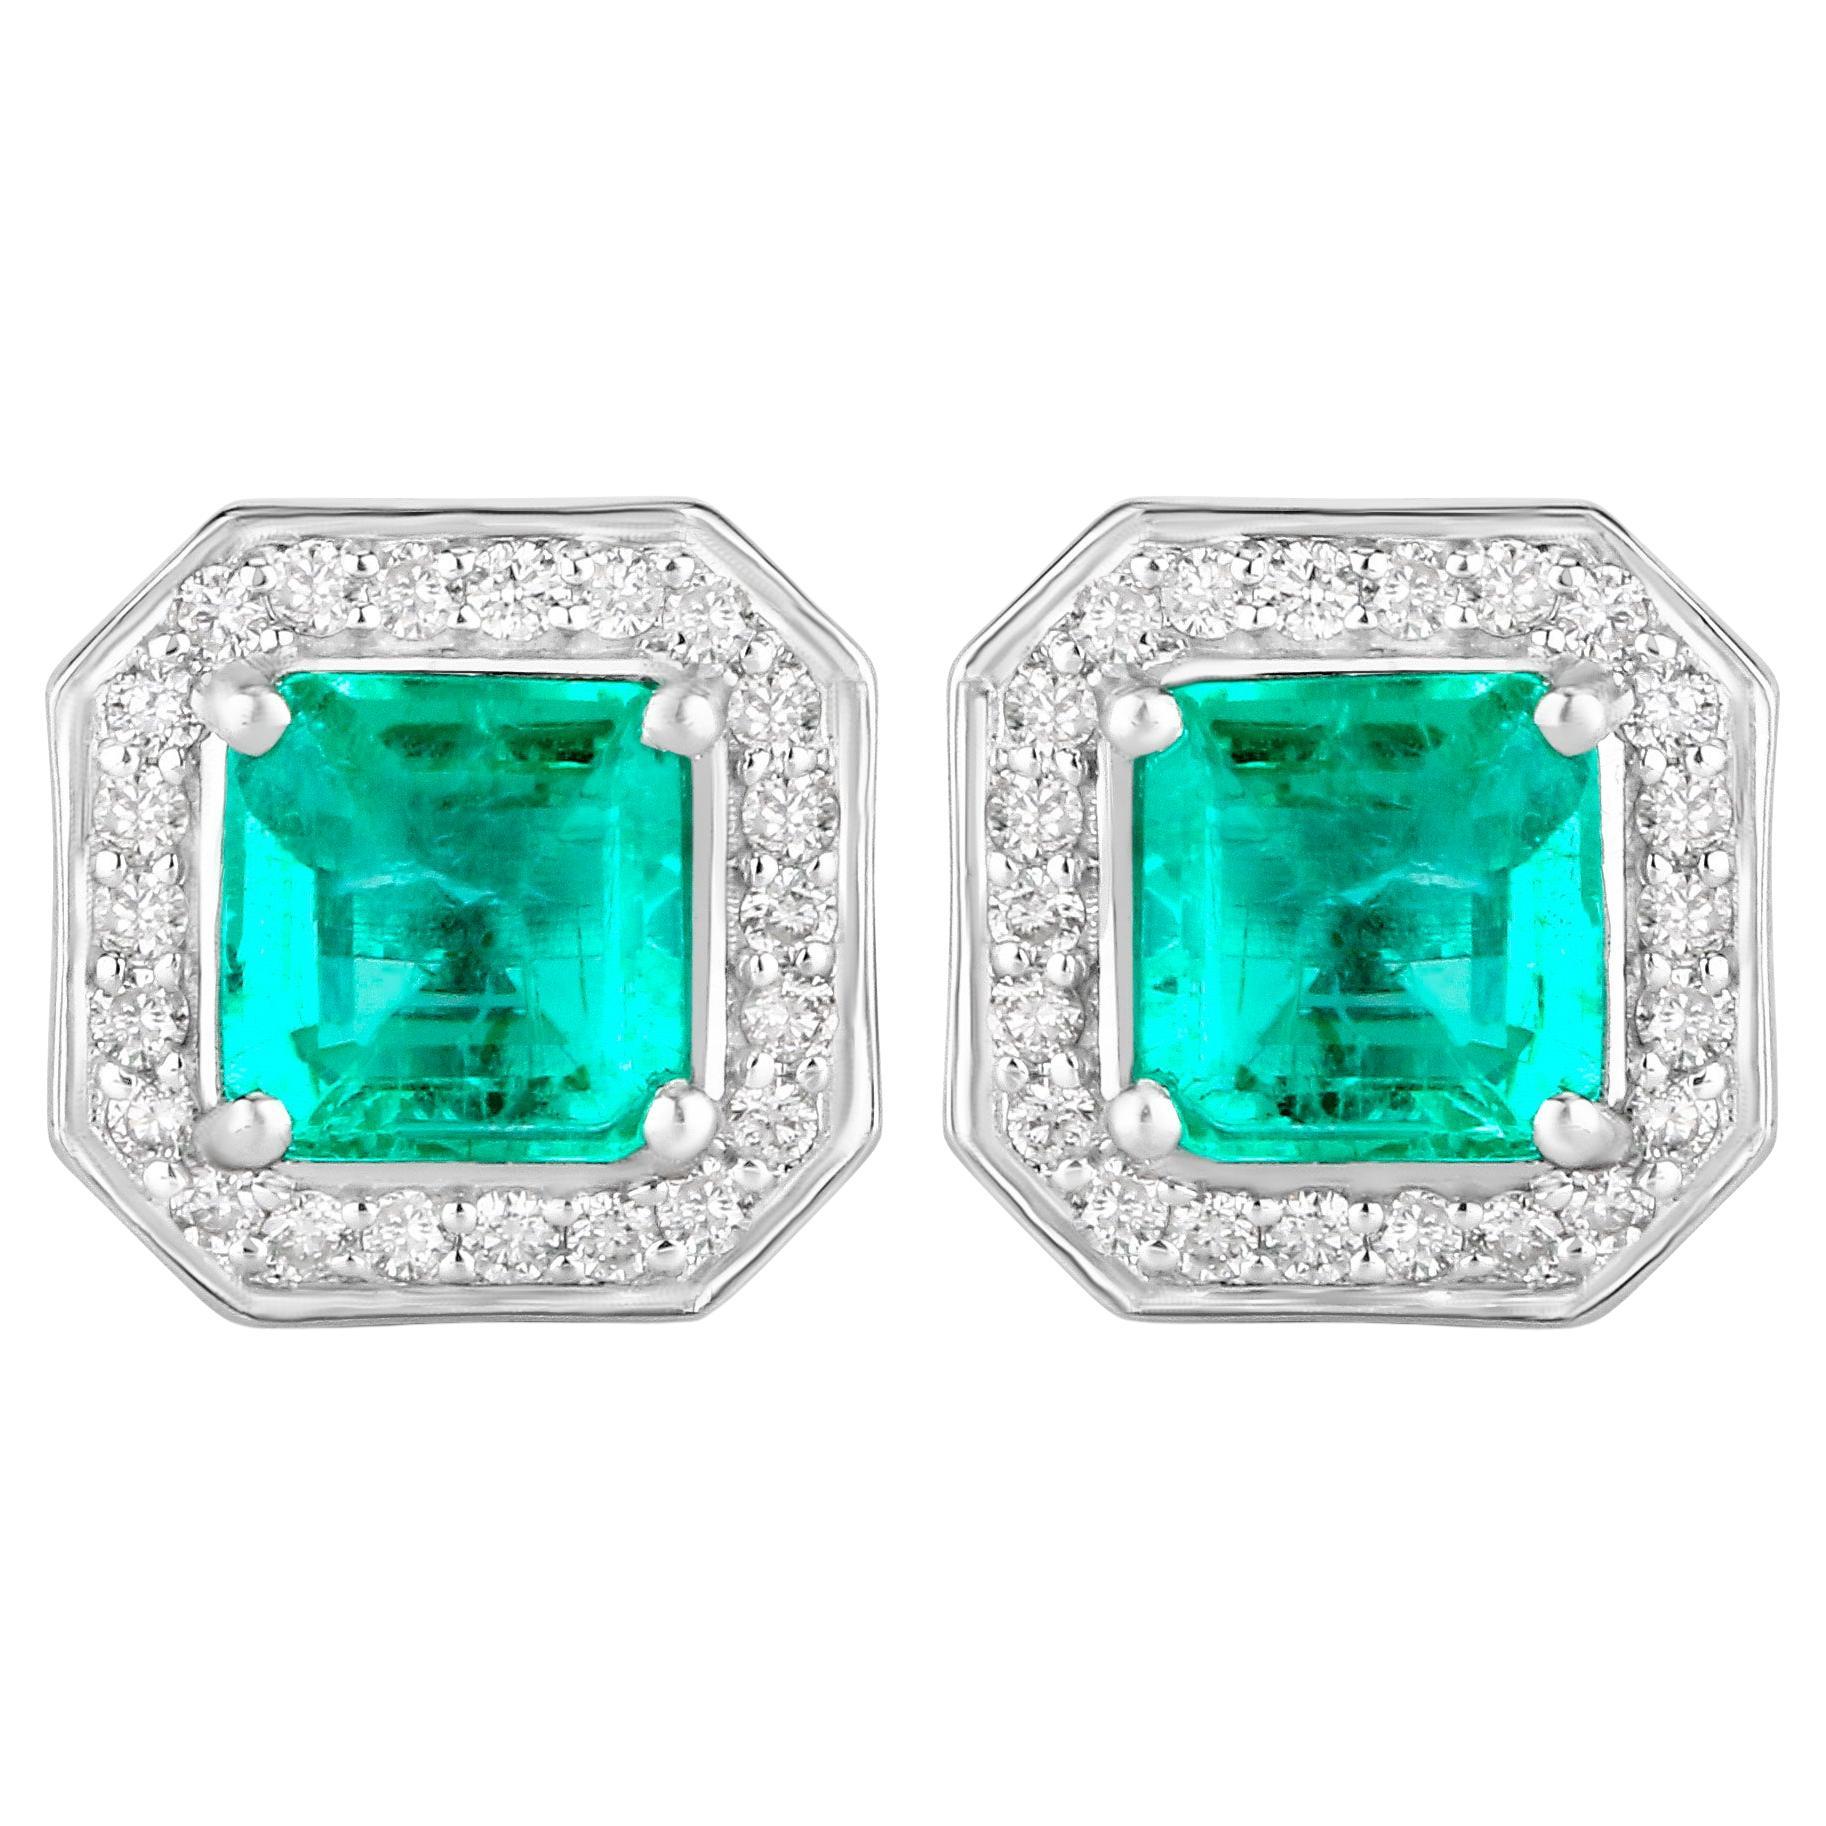 Emerald Stud Earrings With Diamonds 1.90 Carats 14K White Gold For Sale